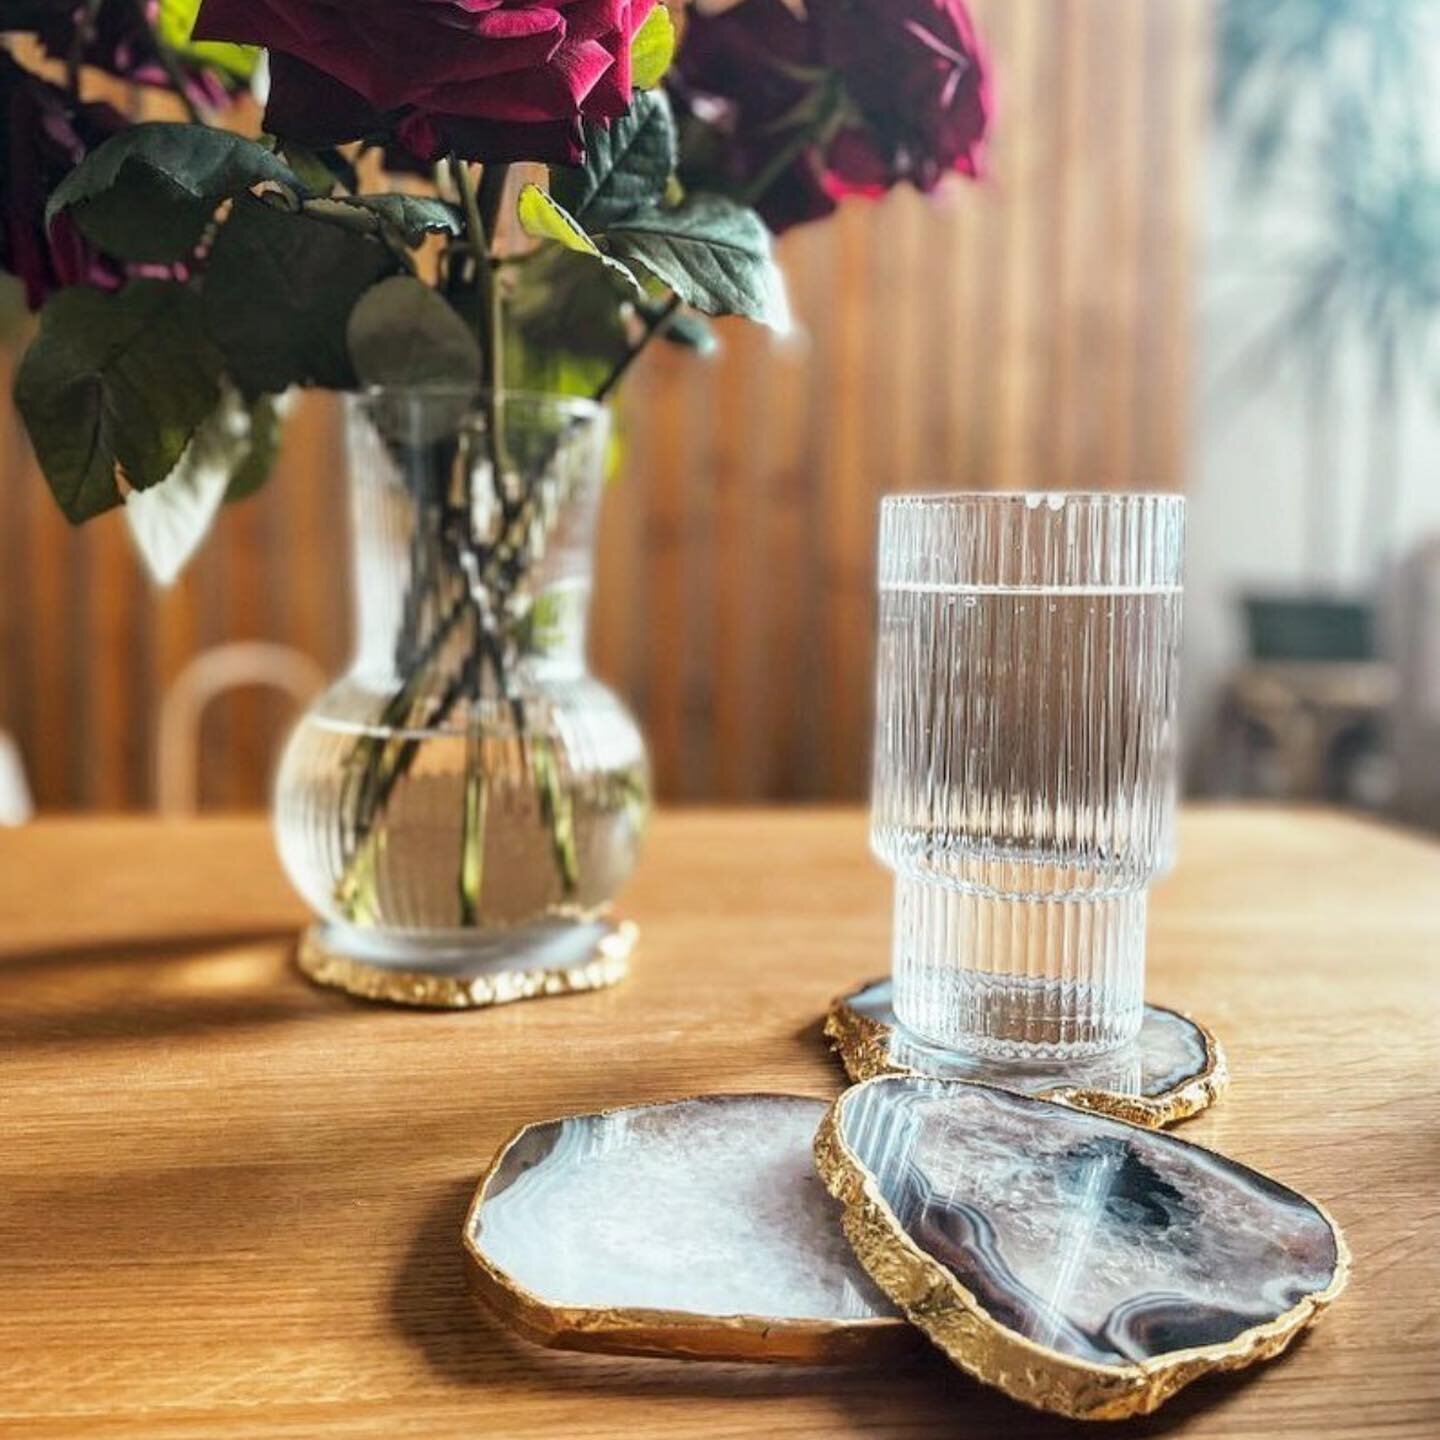 ONE WEEK TO GO until Derbyshire Food, Drink &amp; Gift Fair at Elvaston Castle, the lovely @the_crystal_cottage will be exhibiting with these fab crystal coasters, perfect for any table setting, swipe for more event details ☀️ photo - @the_crystal_co